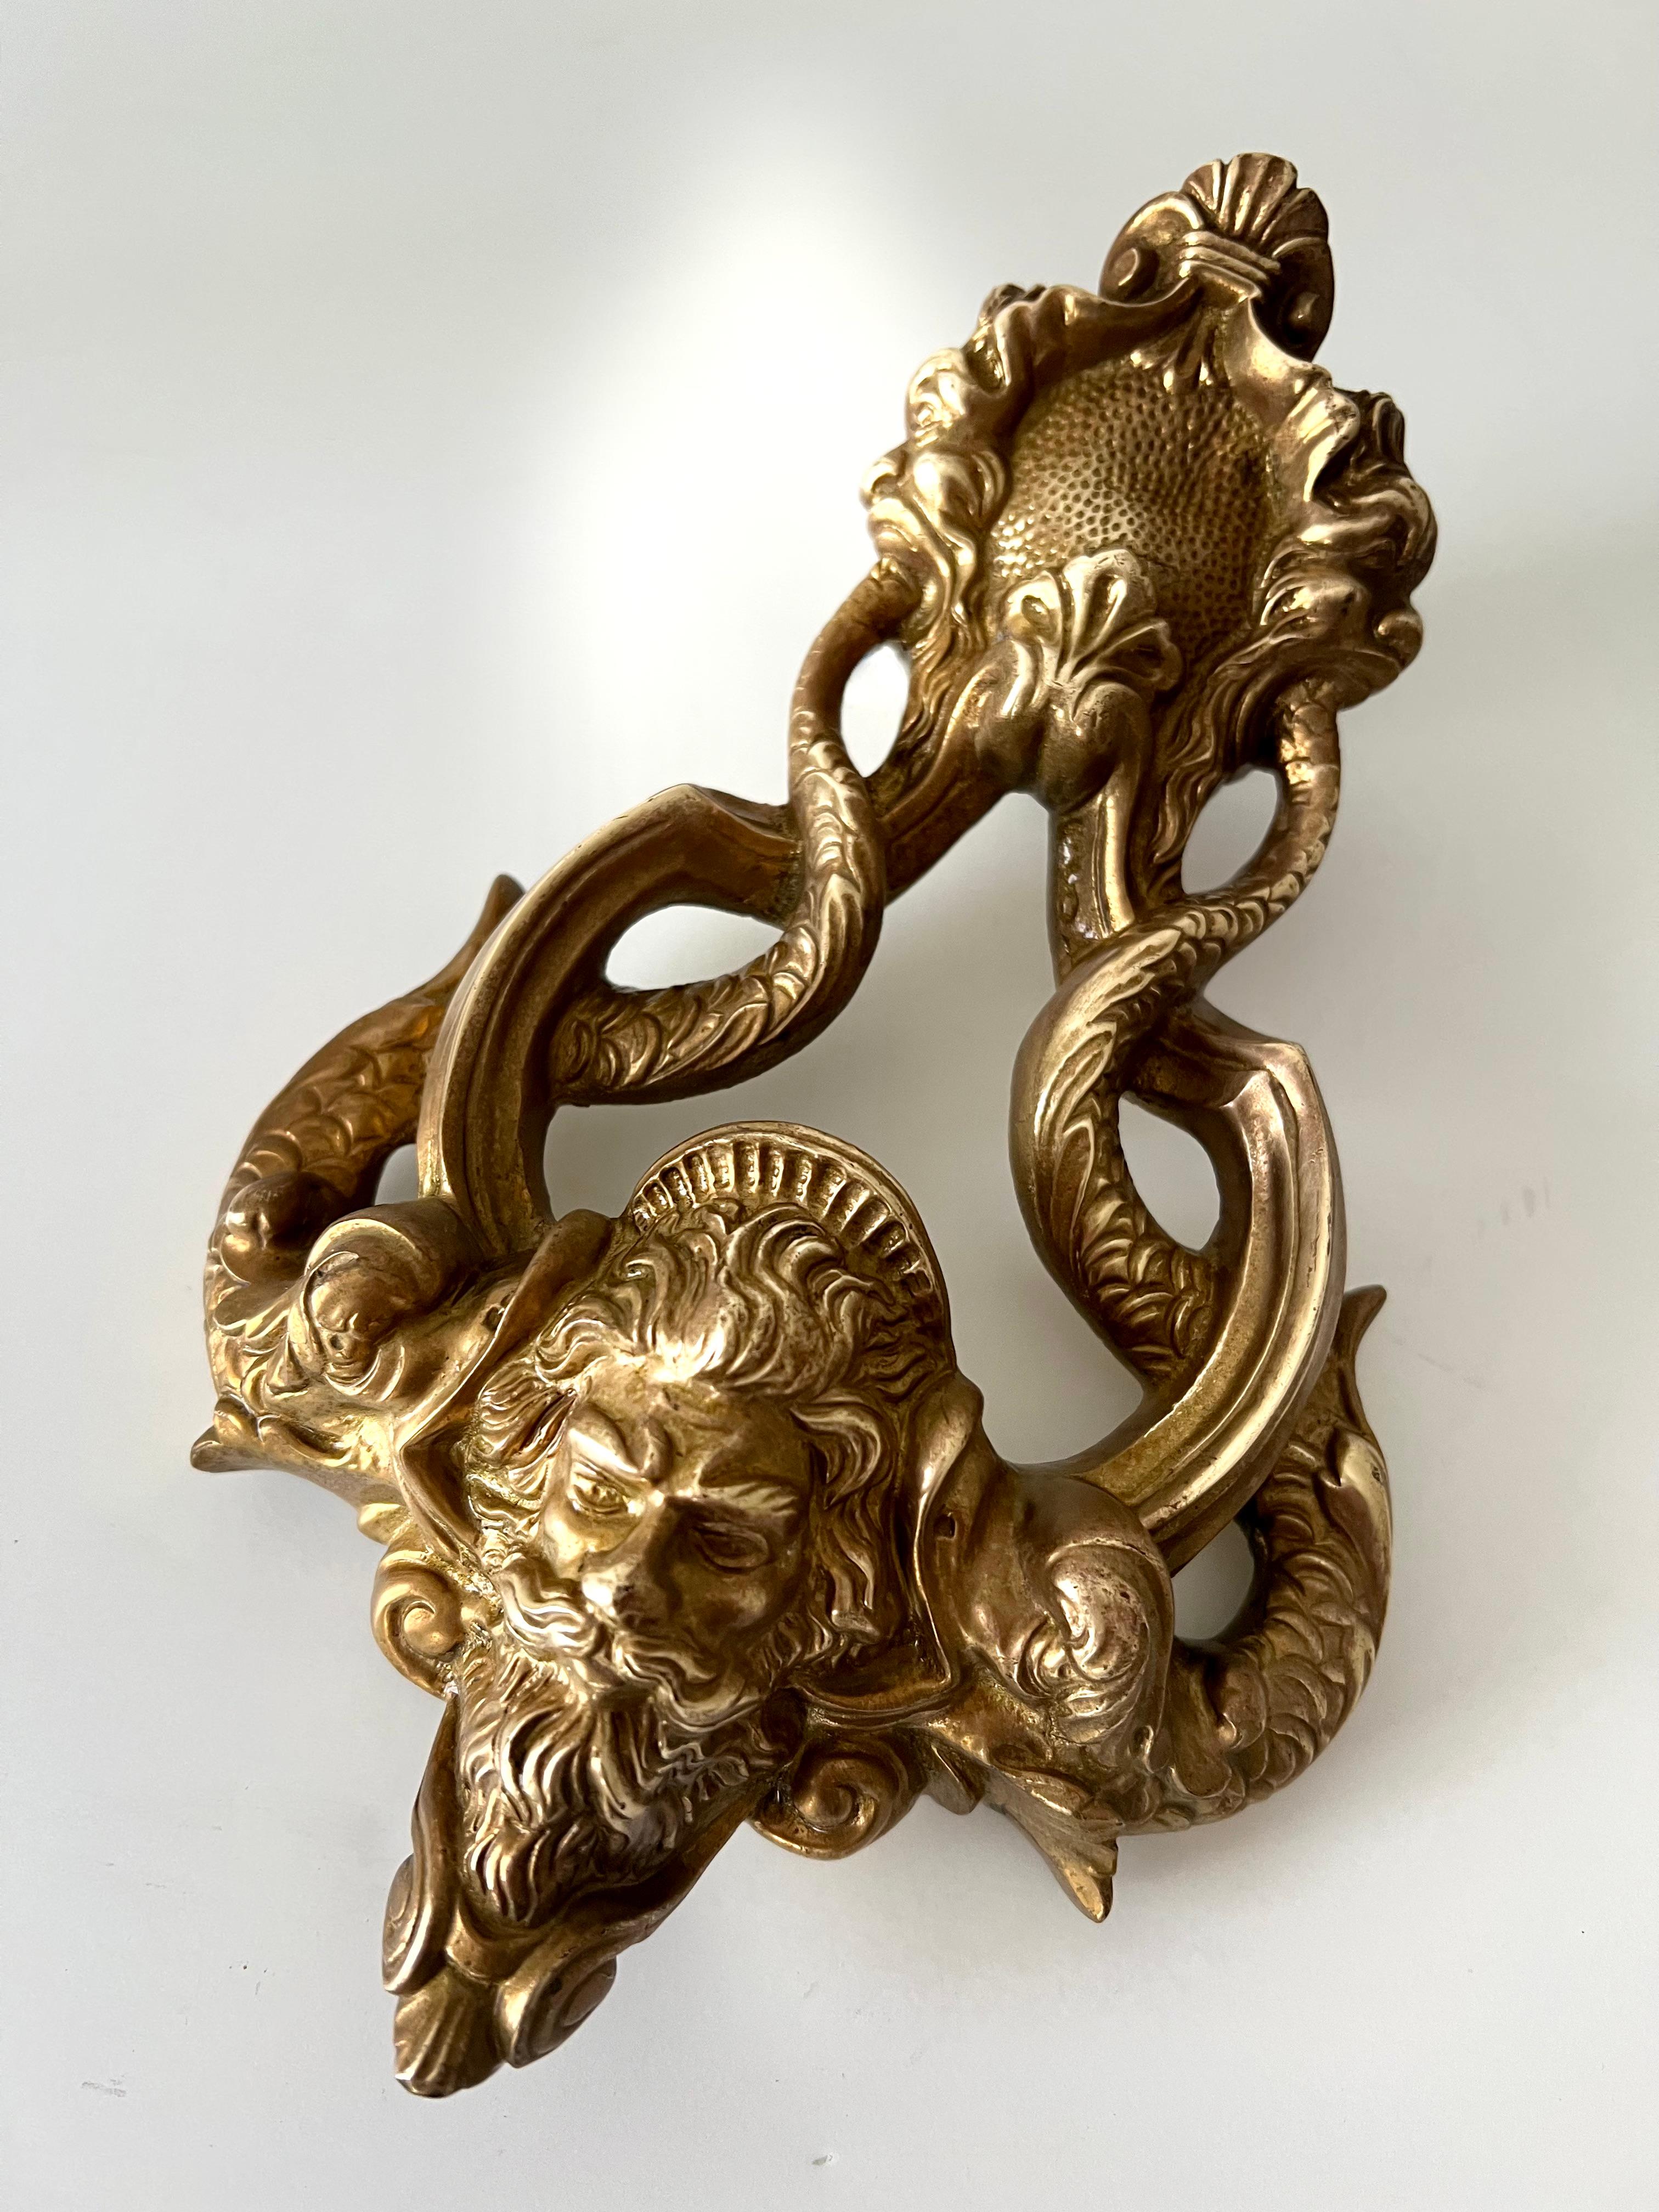 20th Century Solid Brass Spanish Door Knocker with Zeus and Dolphins Intertwined